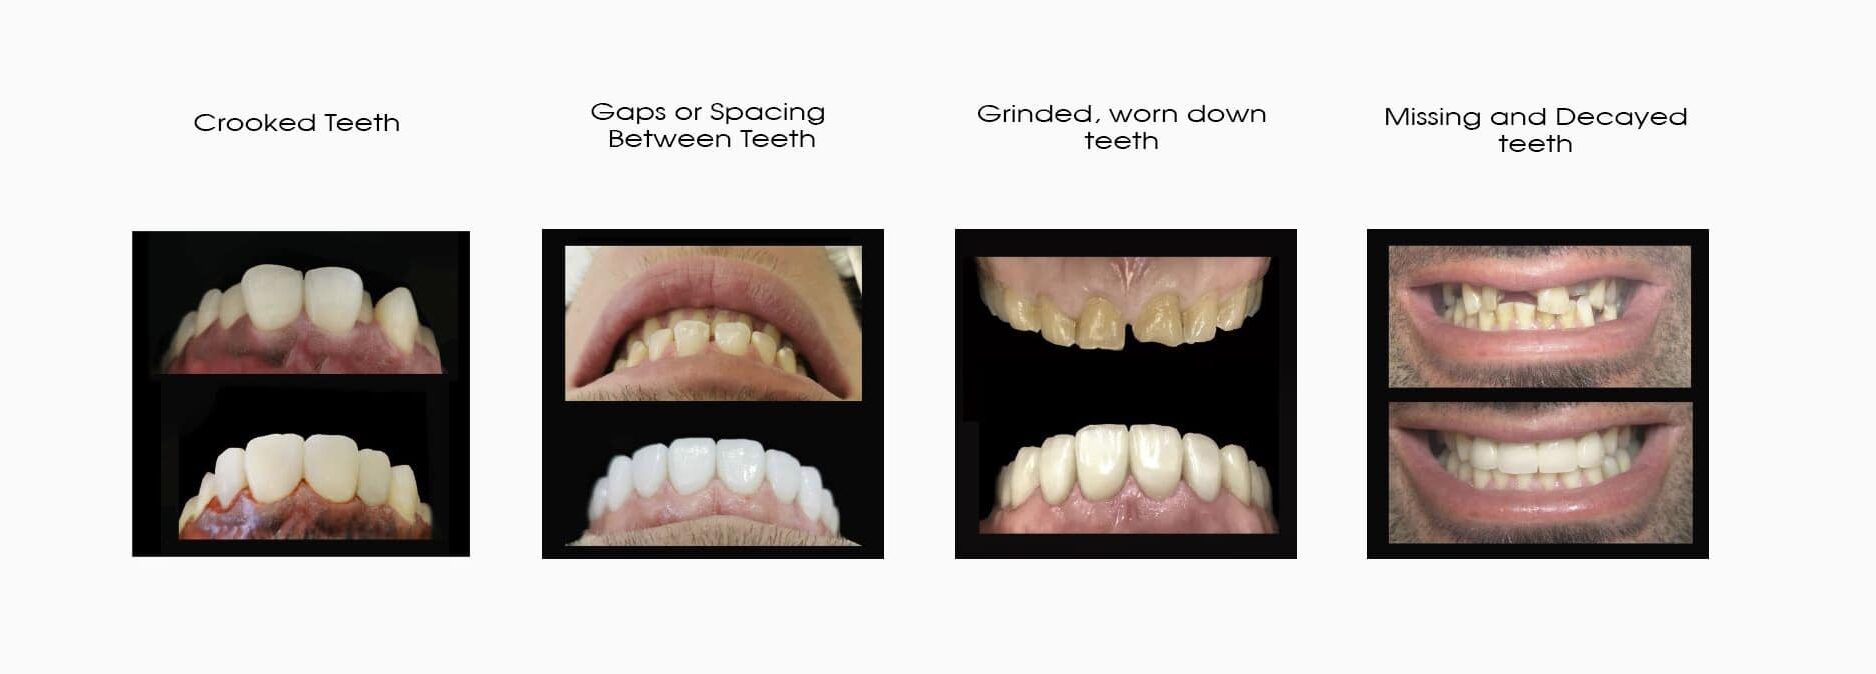 General & Cosmetic Dentistry Clinic - Best Cosmetic Dentist in Melbourne